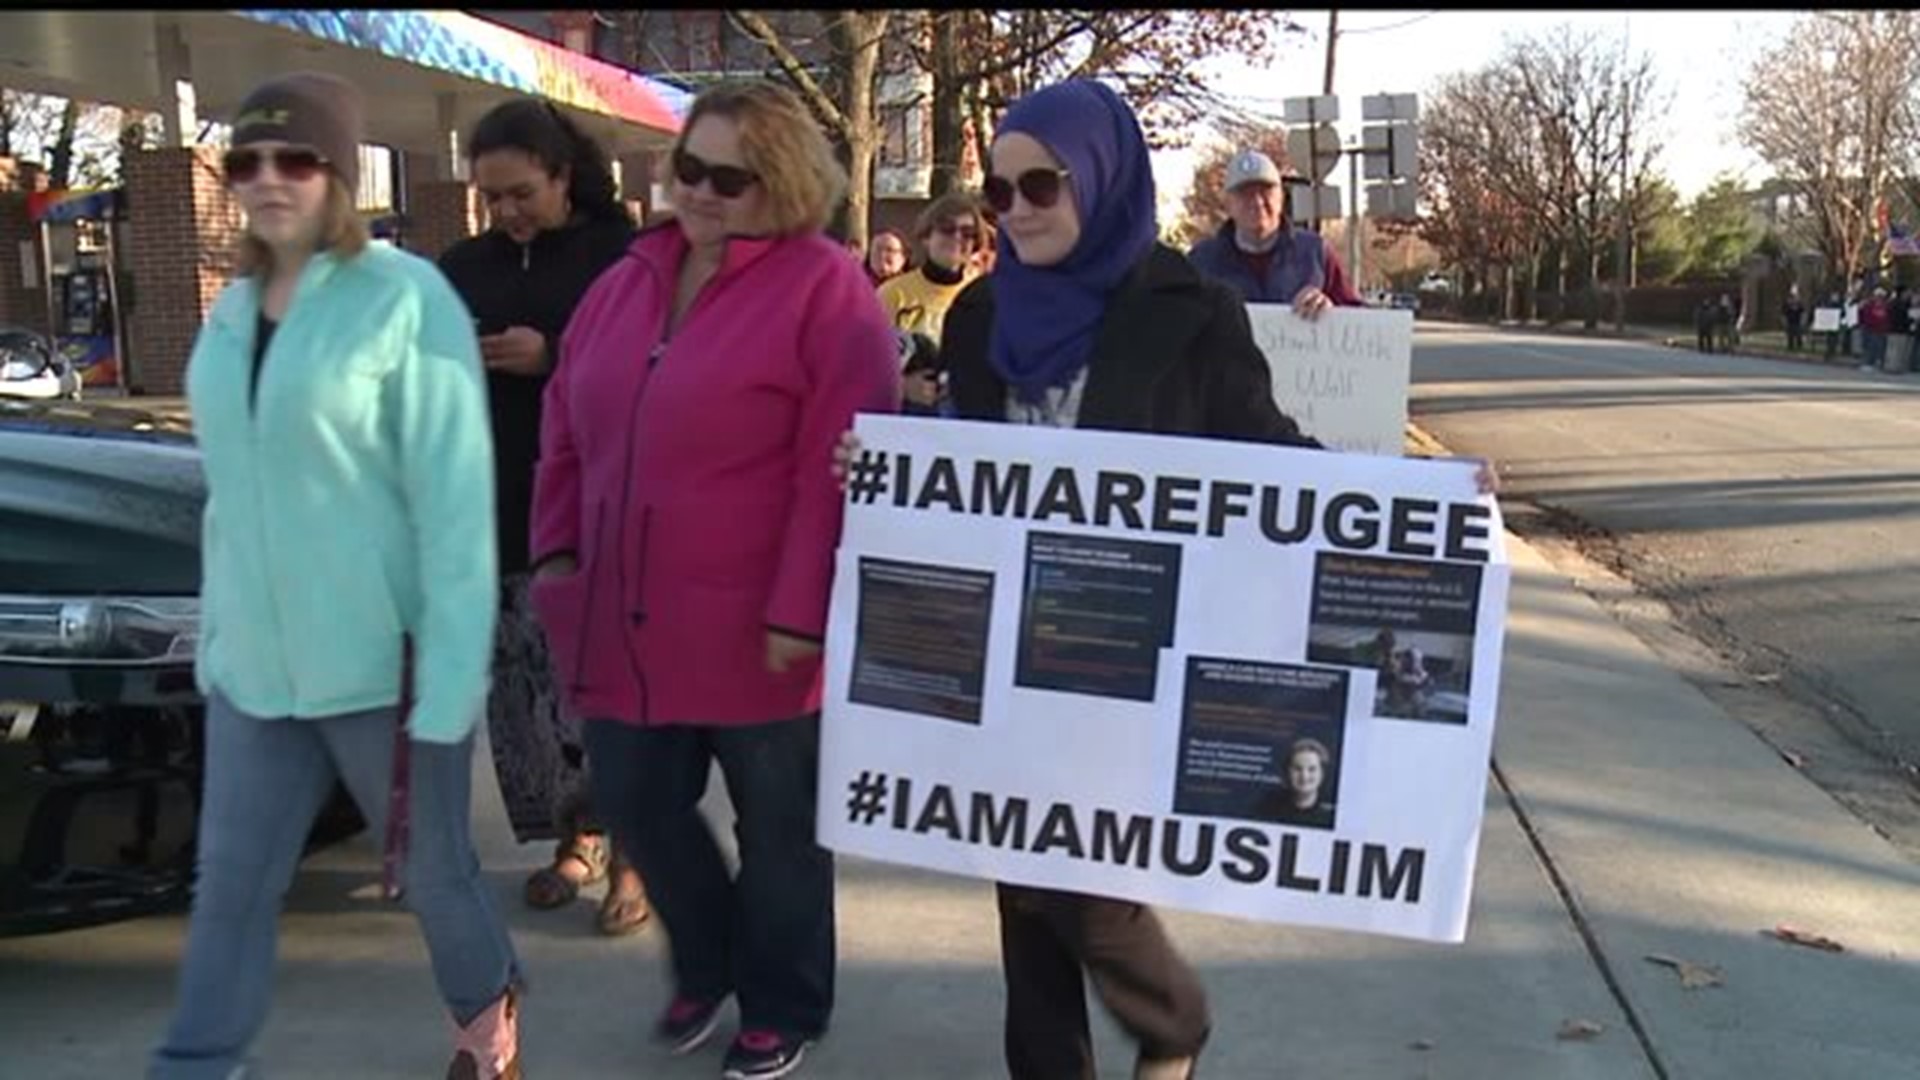 Rallies held in support of Syrian refugees and against them